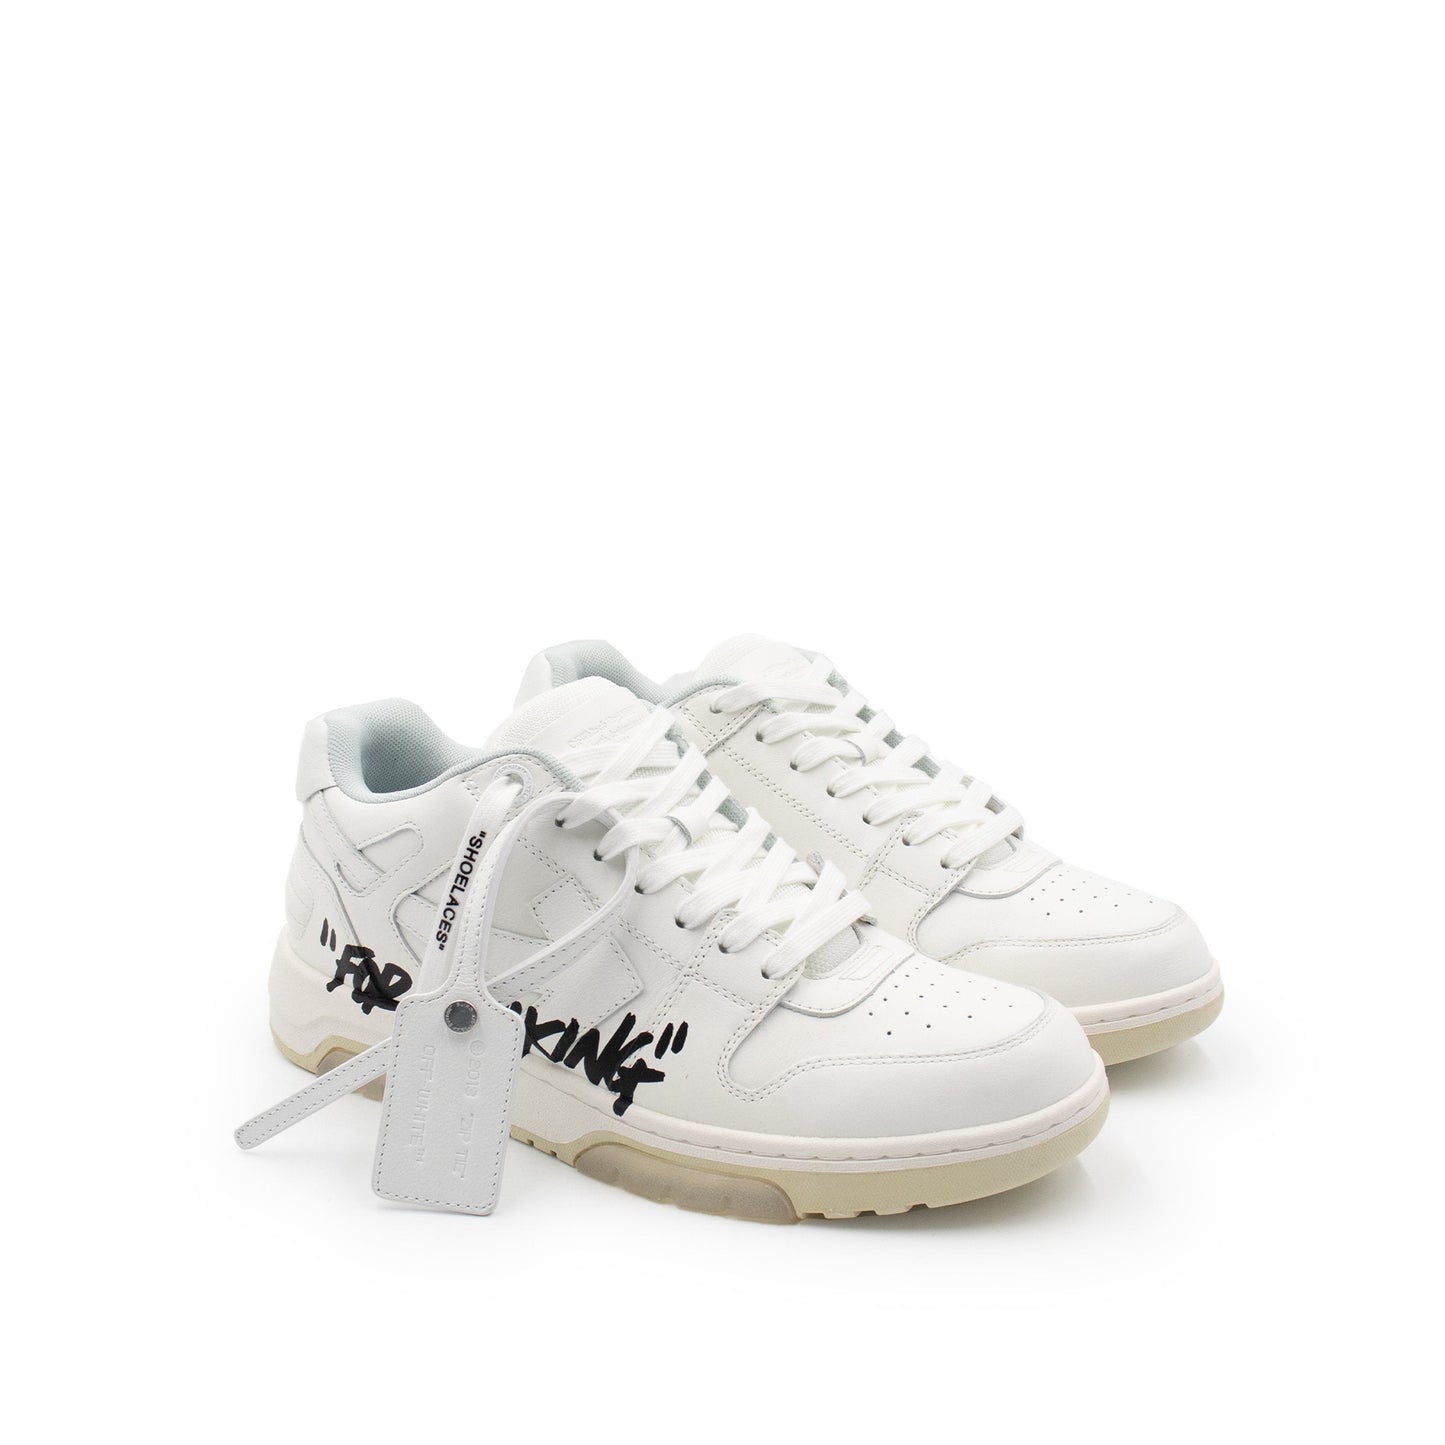 Out Of Office "For Walking" Sneakers in White & Black